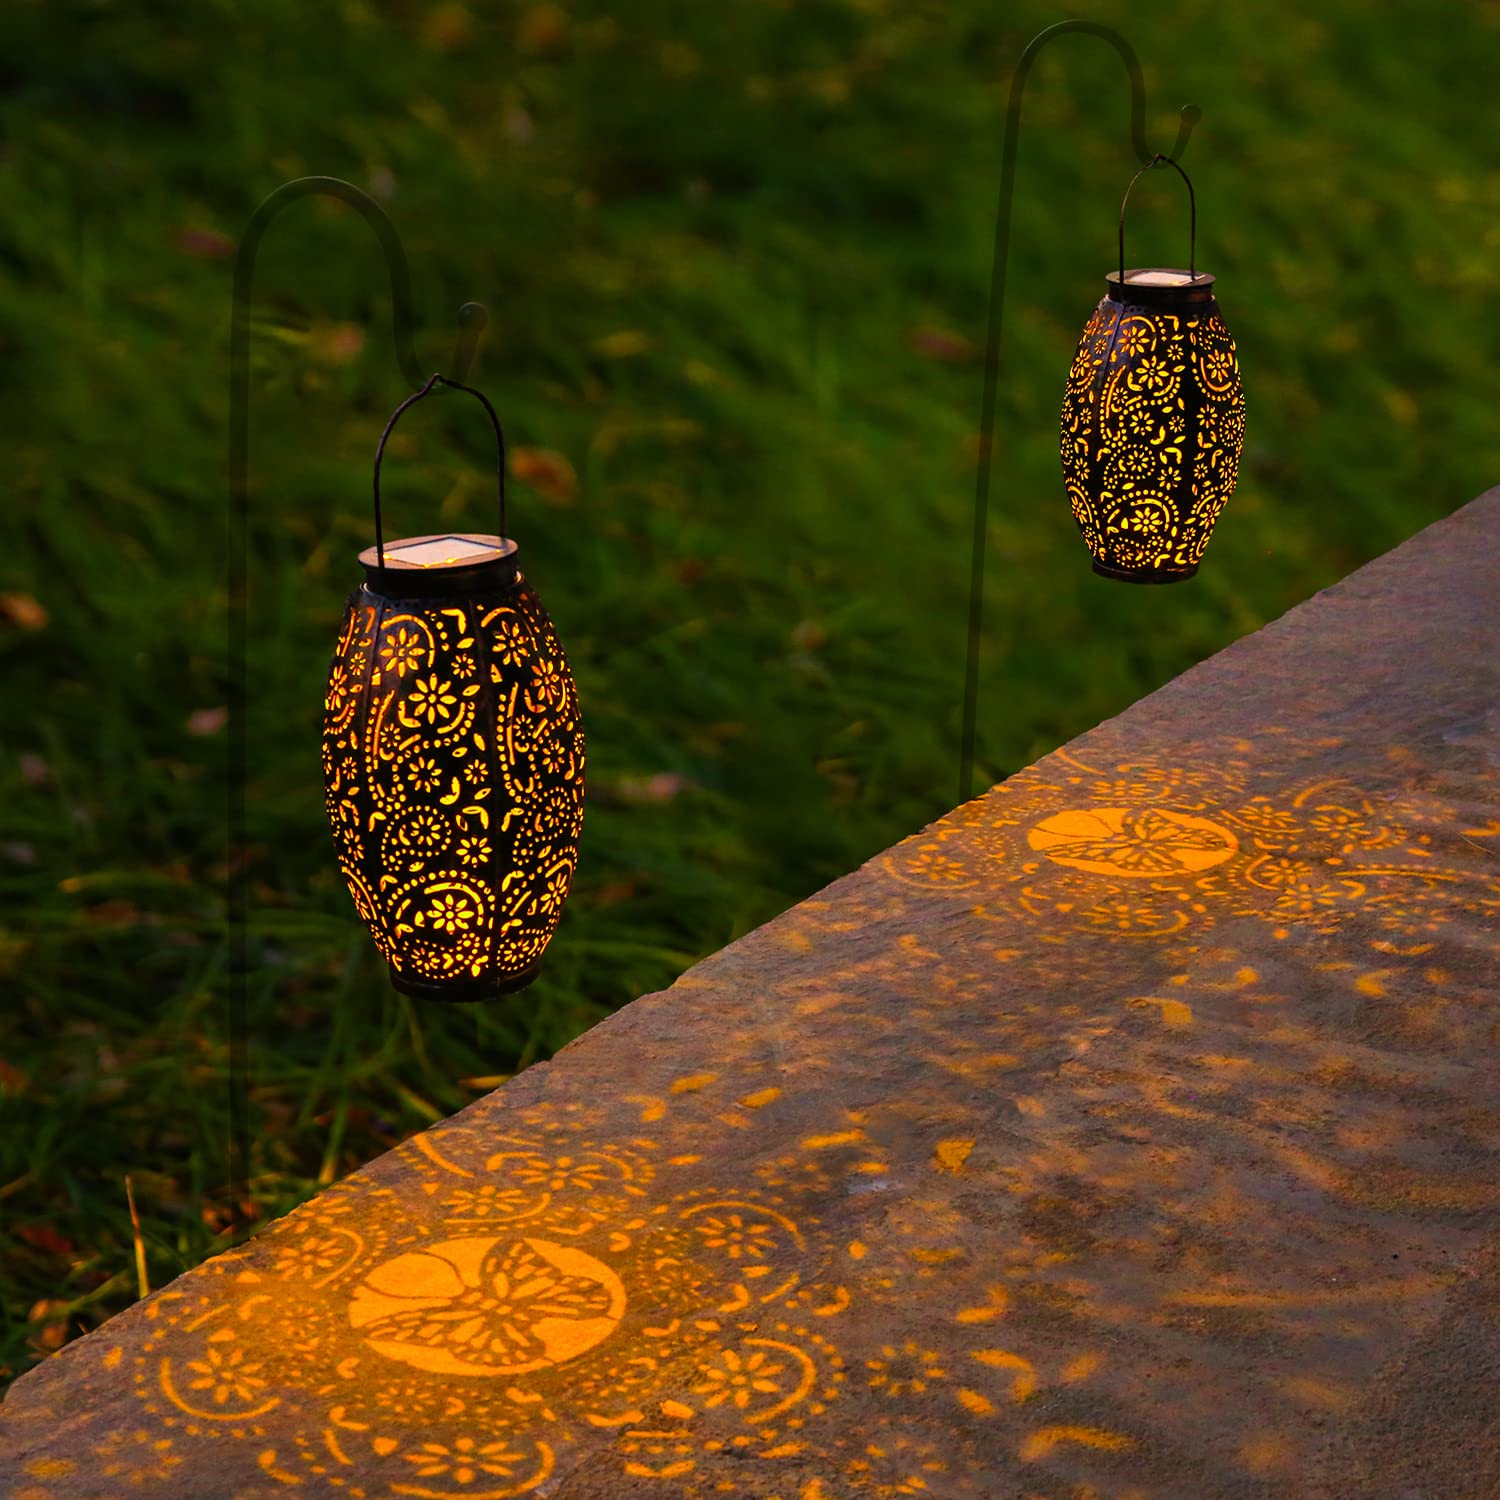 Garden Light Outdoor Solar Lantern - OxyLED 2 Pack Hanging Moroccan Ornaments Waterproof Retro Metal LED Solar Powered Butterfly Lamp for Deco Patio Fence Table Pathway Party Bronze,Hook NOT Included